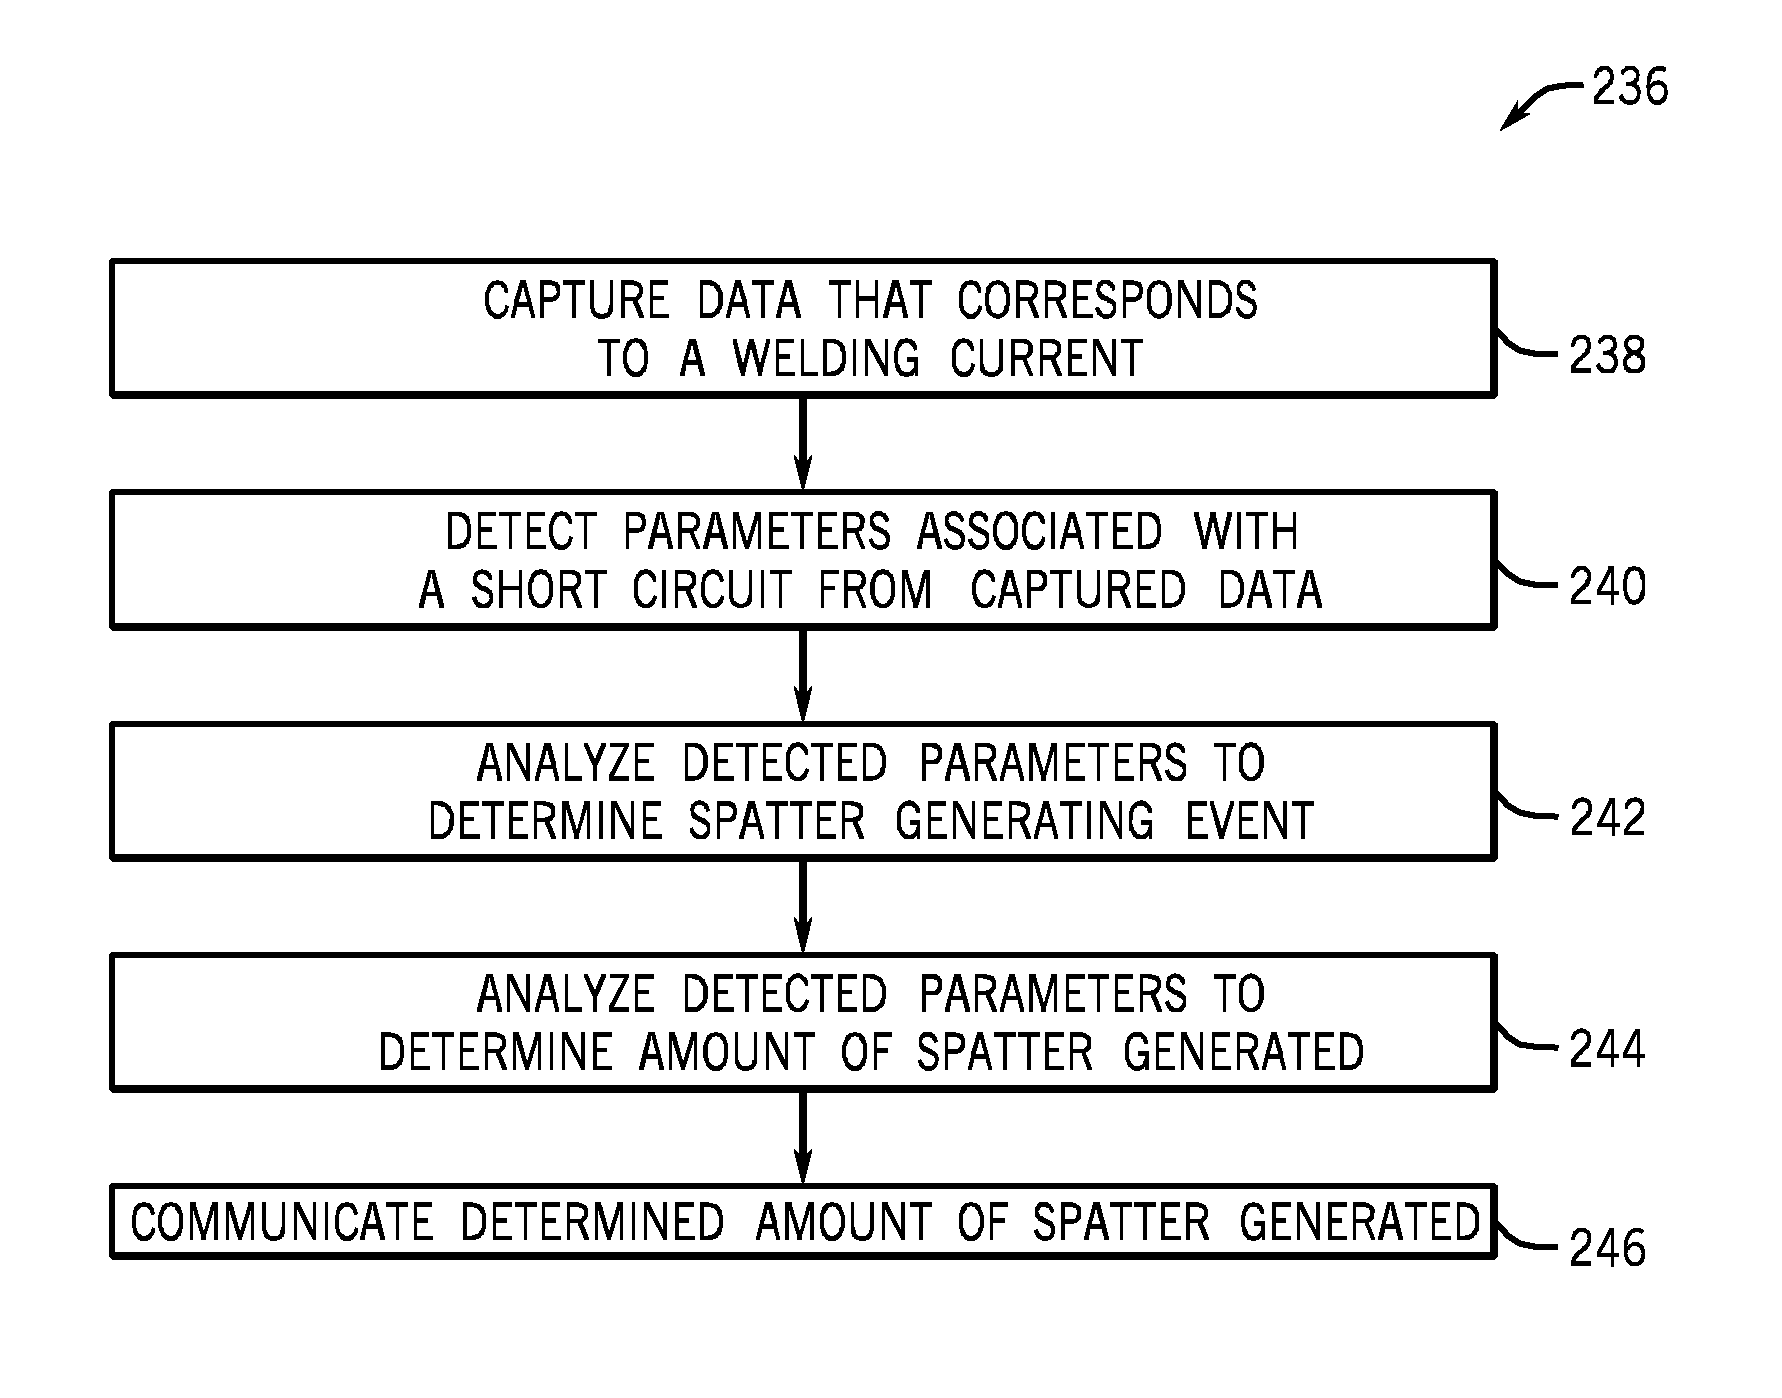 Devices and methods for analyzing spatter generating events